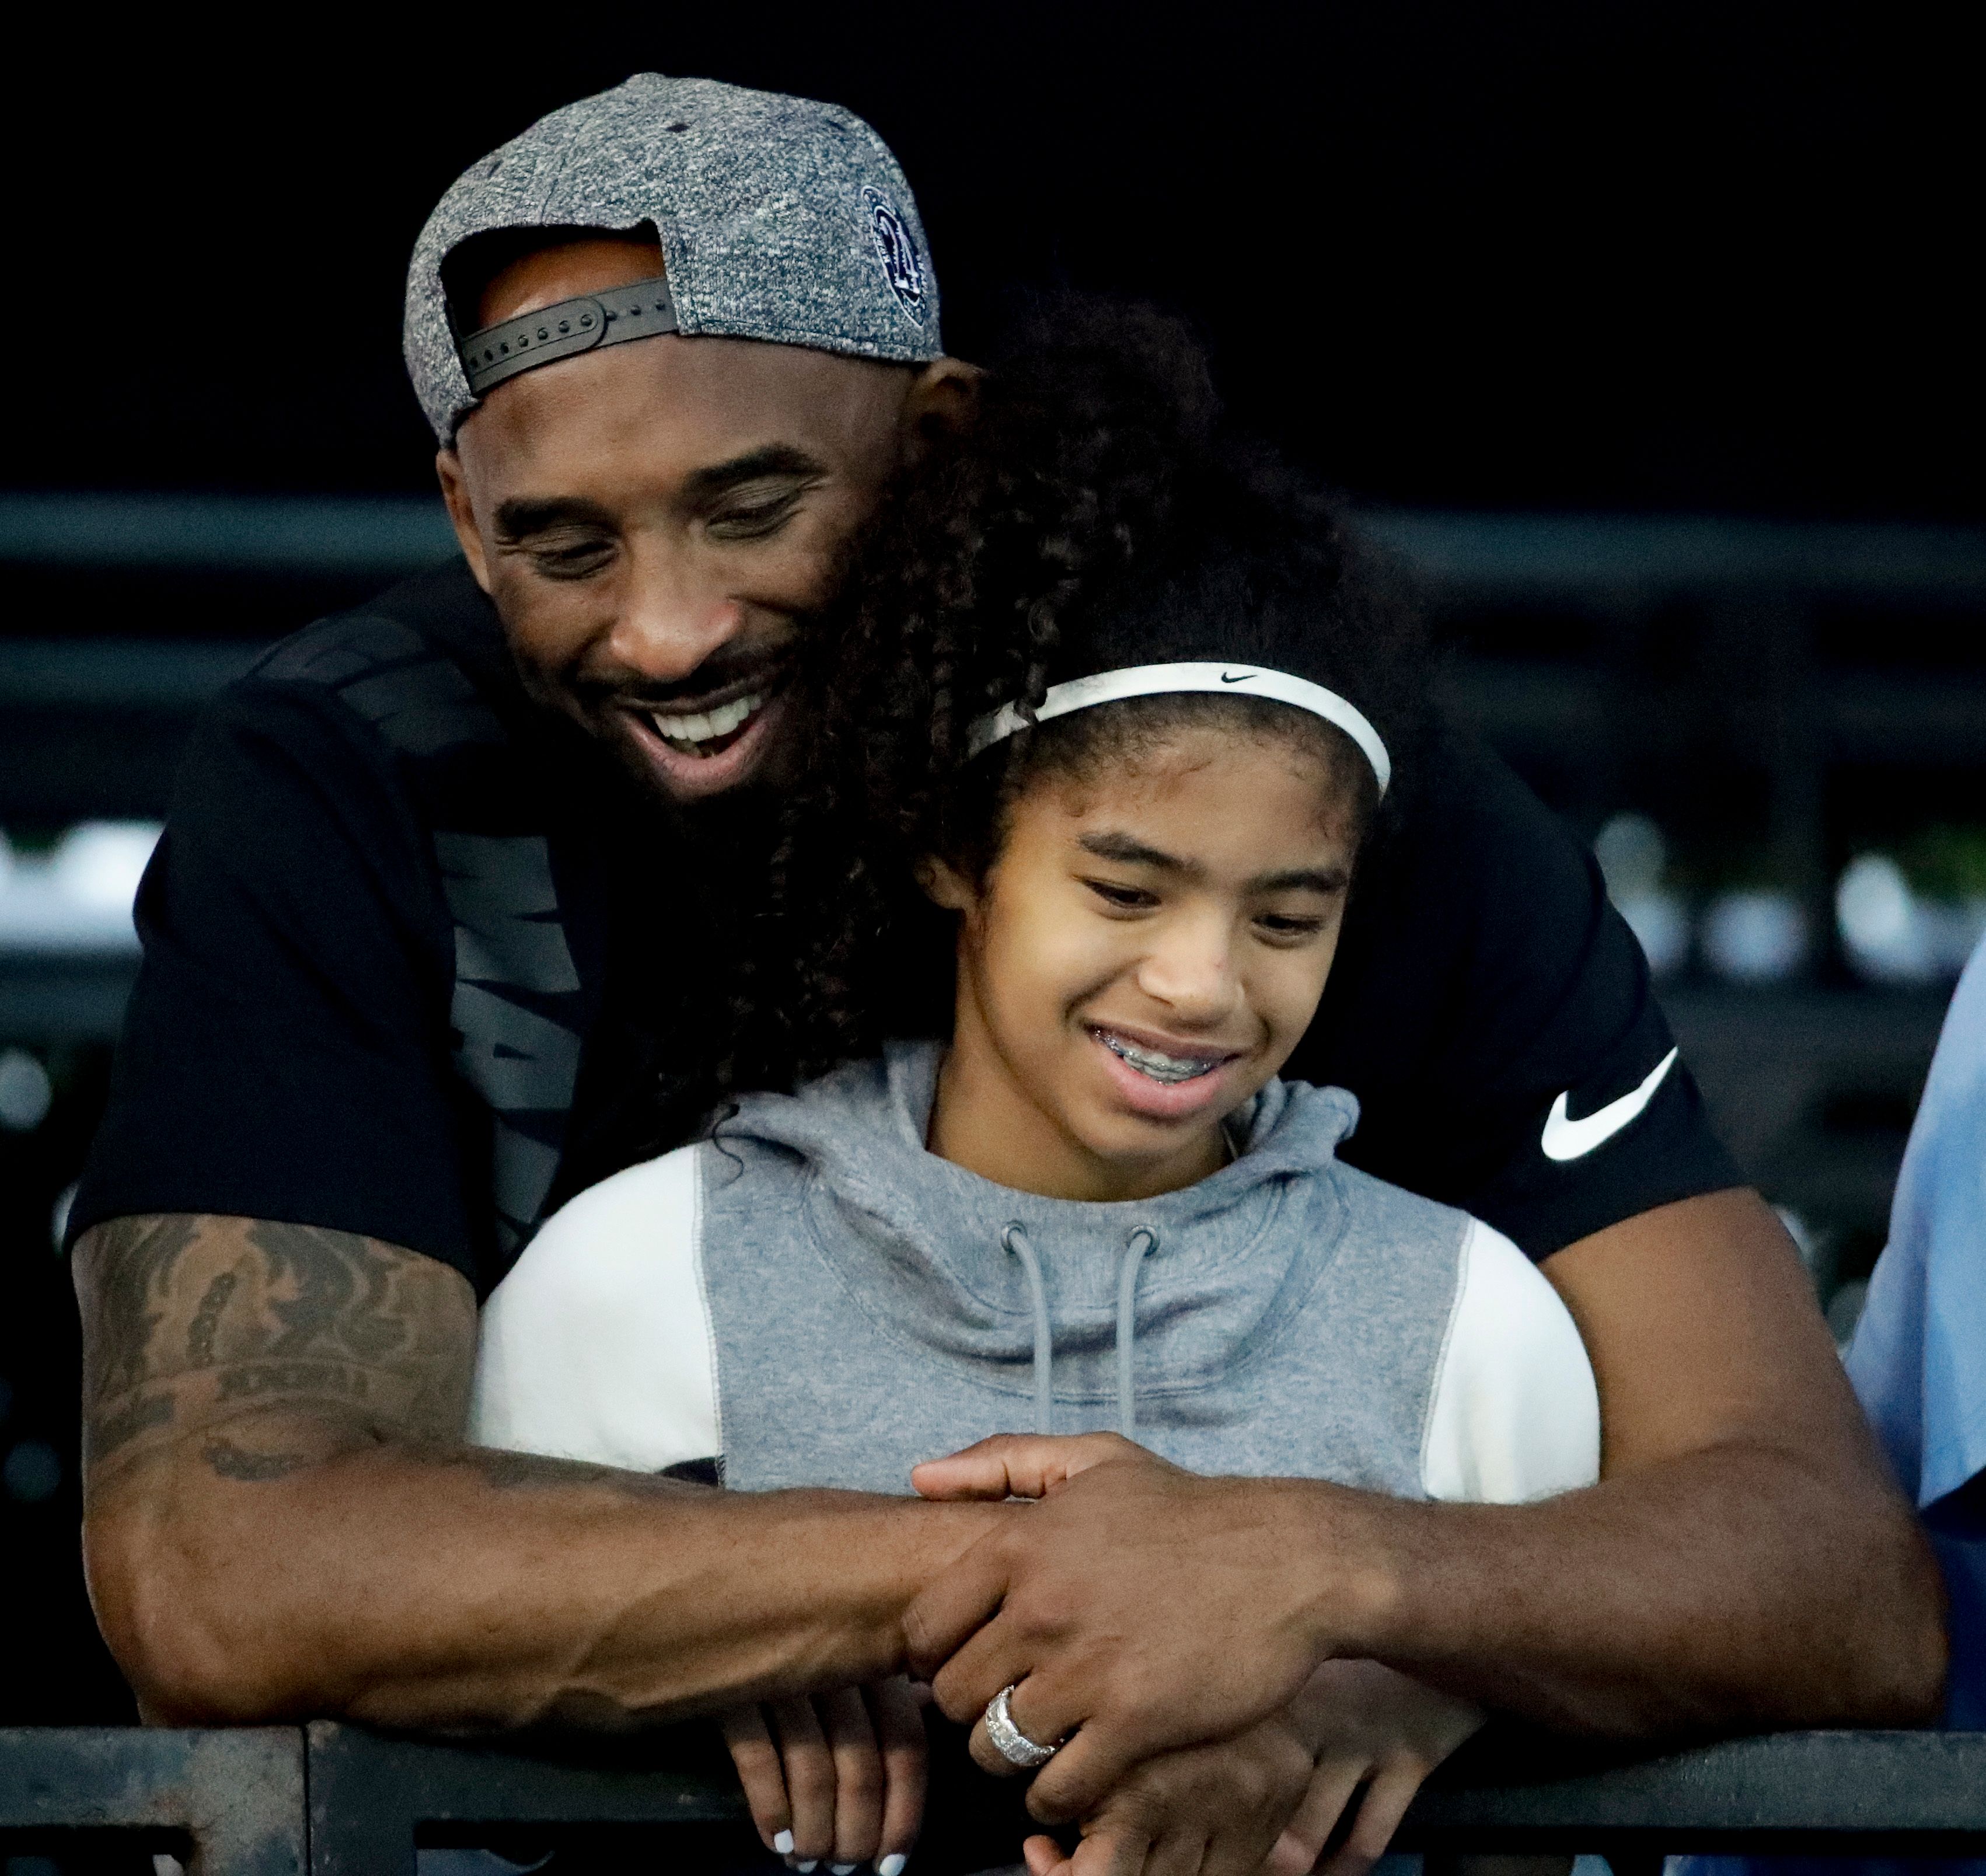 Gianna Bryant, 13, was going to carry on a basketball legacy | The